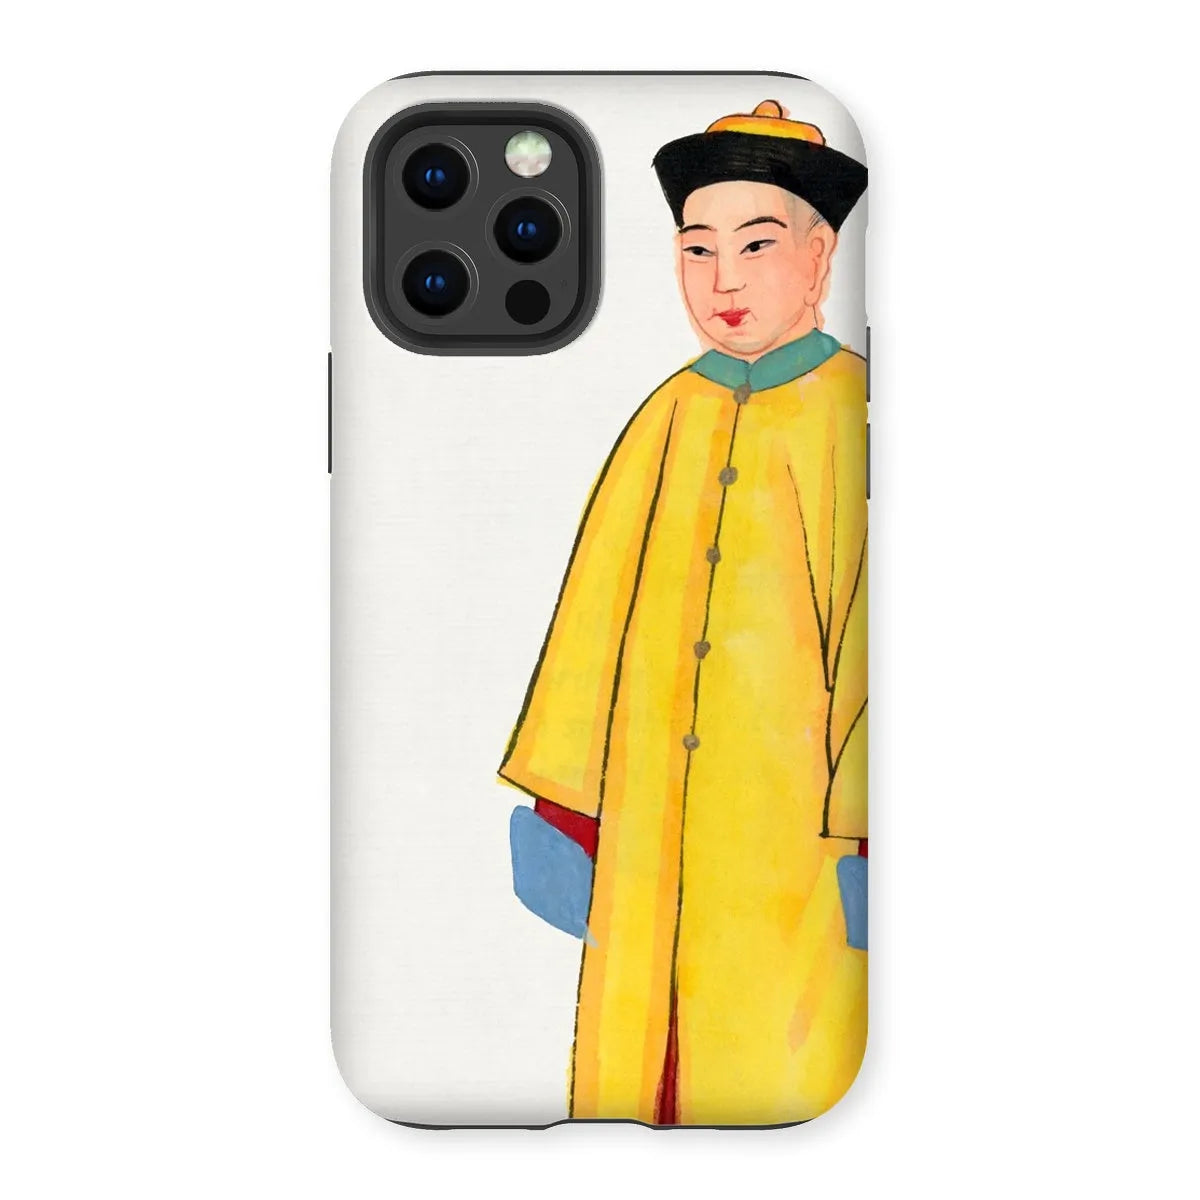 Priest In Yellow Robes - Chinese Aesthetic Art Phone Case - Iphone 12 Pro / Matte - Mobile Phone Cases - Aesthetic Art